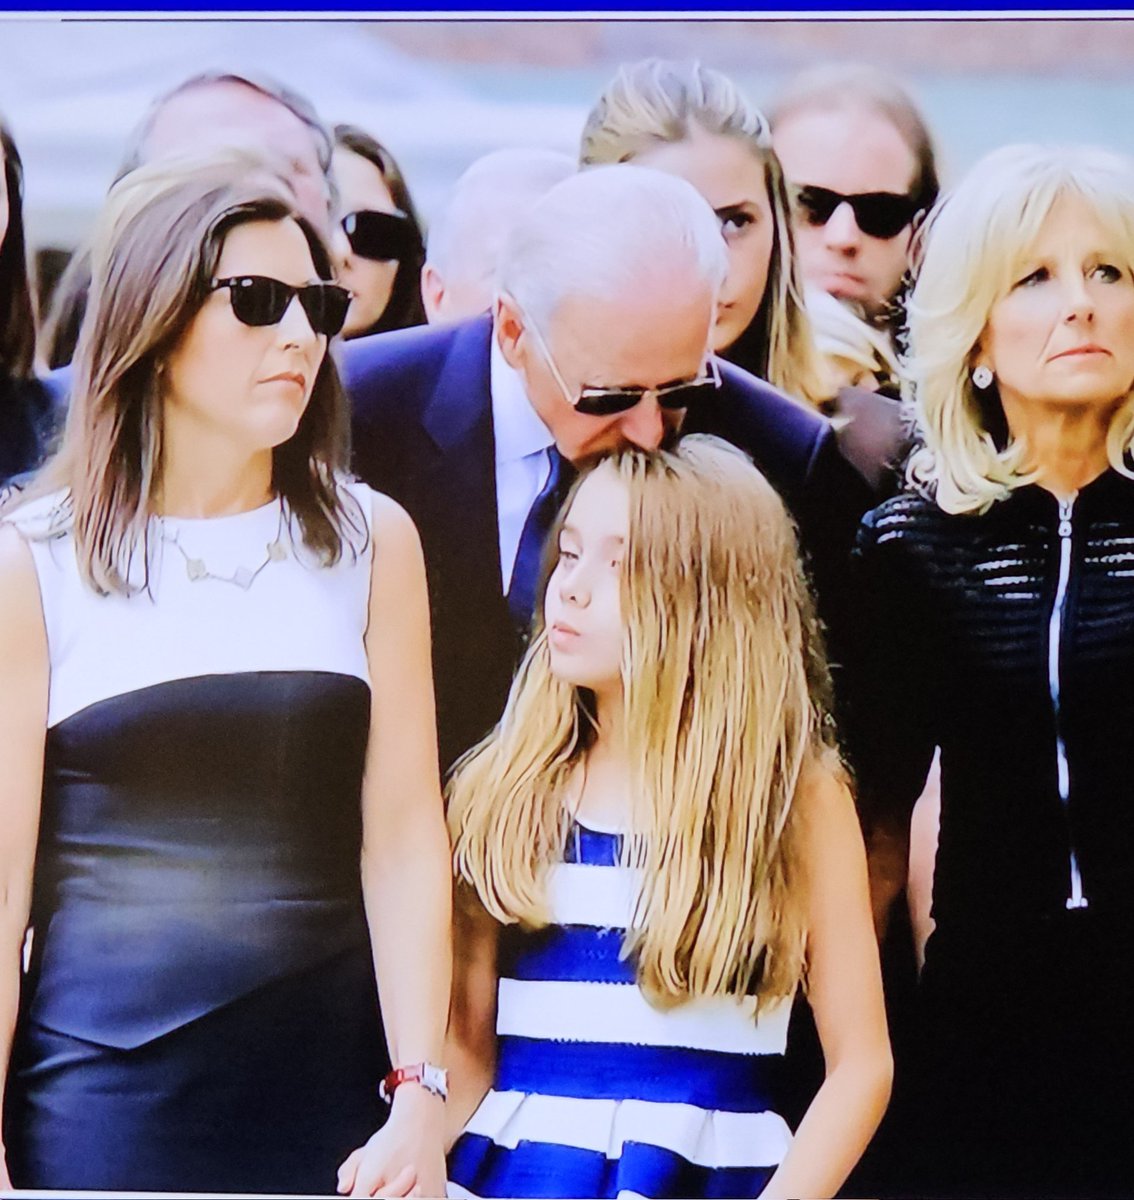 The Freak show, @JoeBiden just can't keep his fkg disgusting nose off, so damn creepy & incestuous how he sniffs women & girls, family or not #CreepyJoe